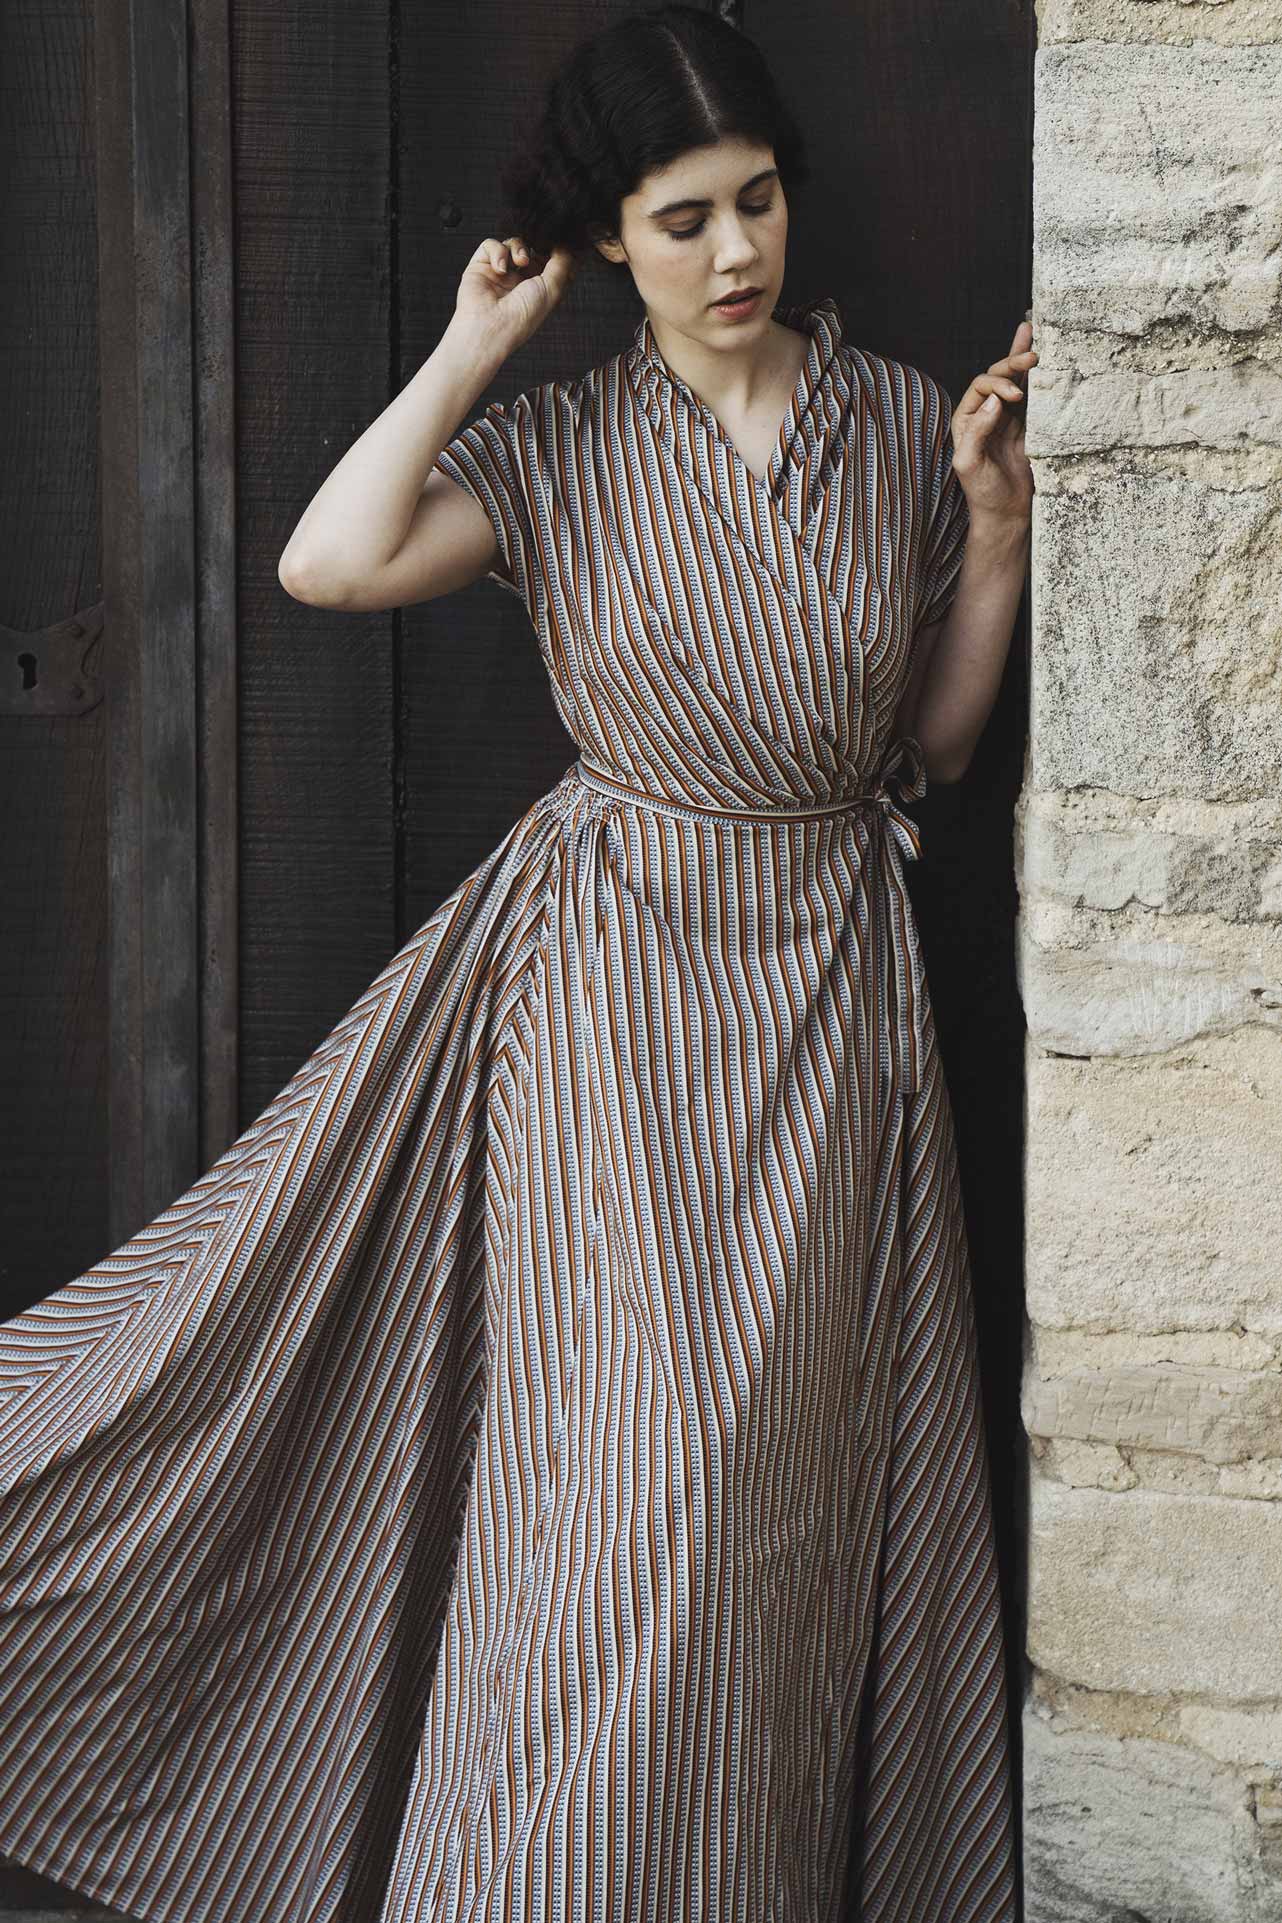 Louise wearing the Isolde Copper Long Dress by Thierry Colson - Photographed by Jamie Beck